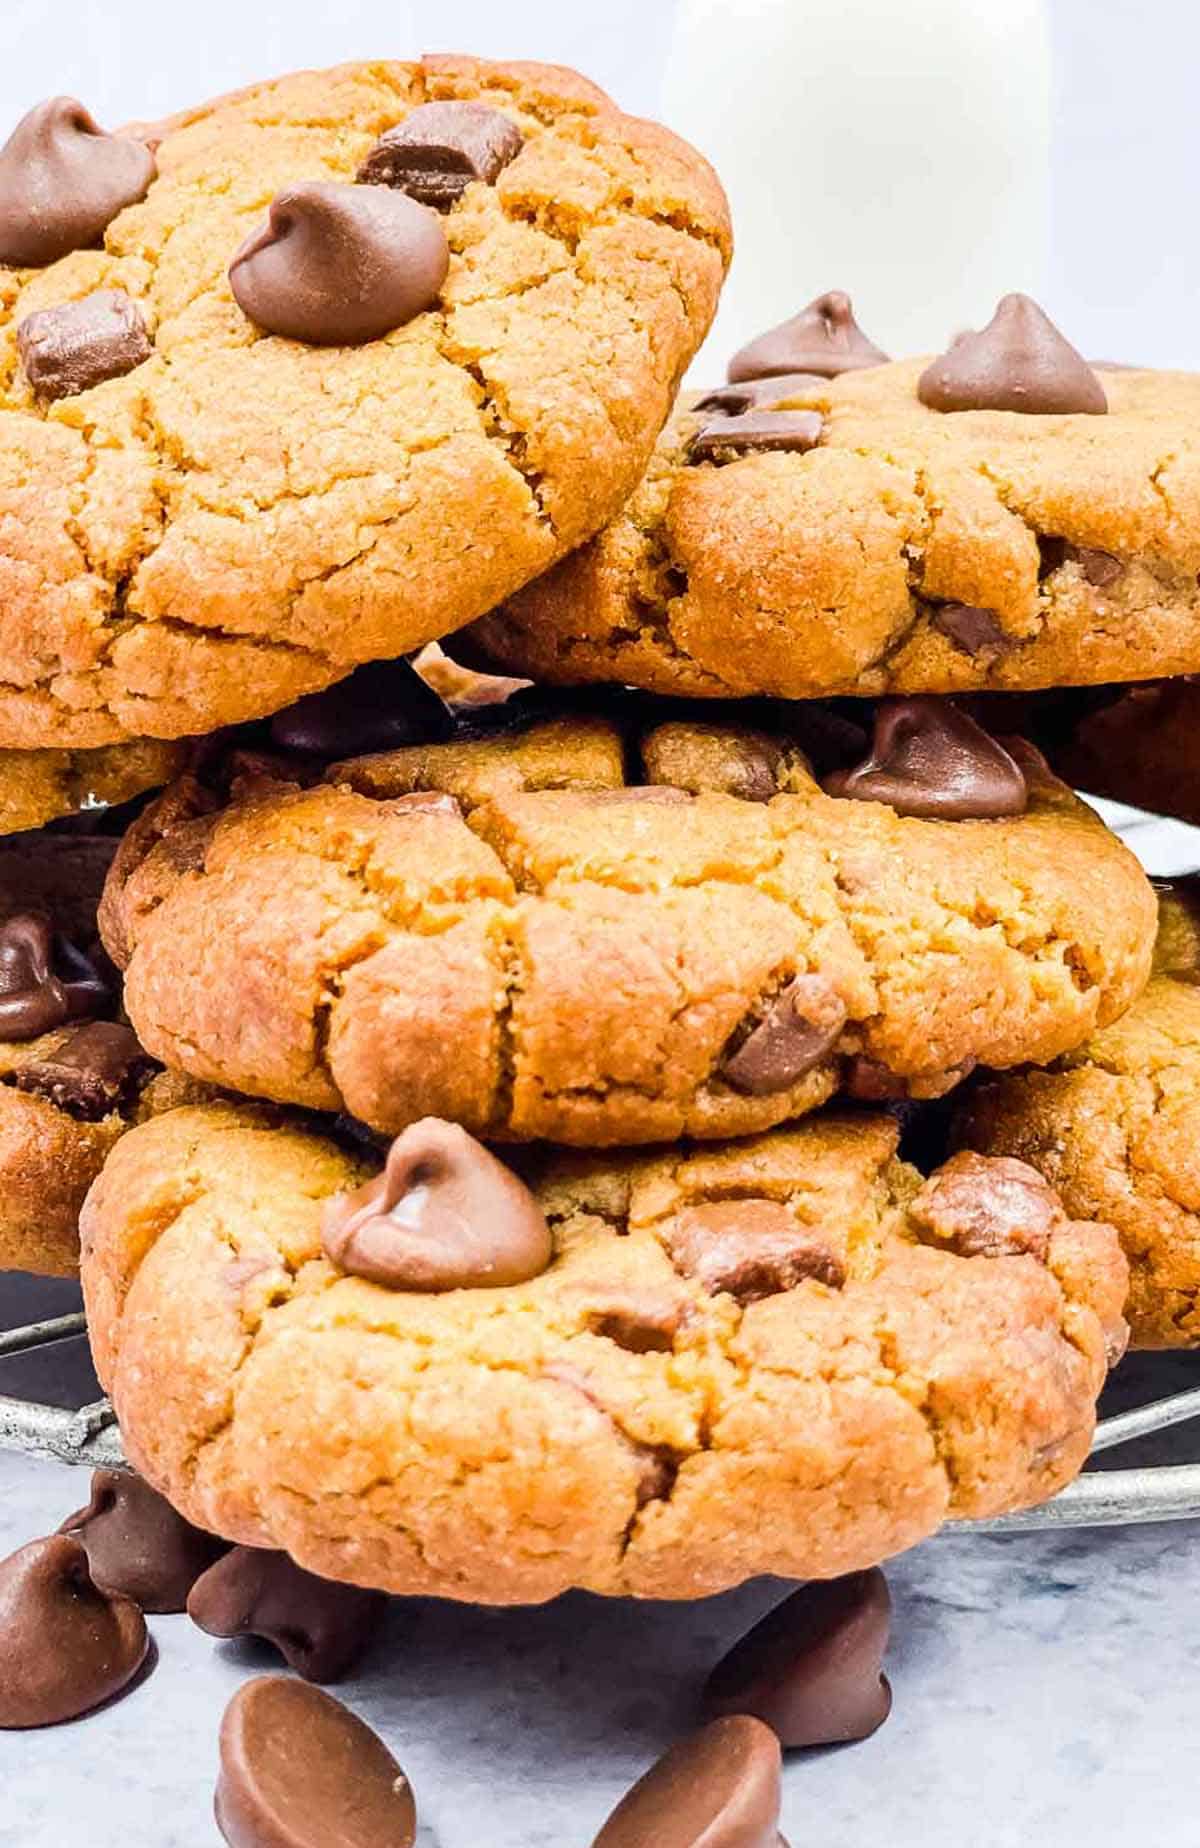 Delicious peanut butter chocolate chip cookies straight from the air fryer.